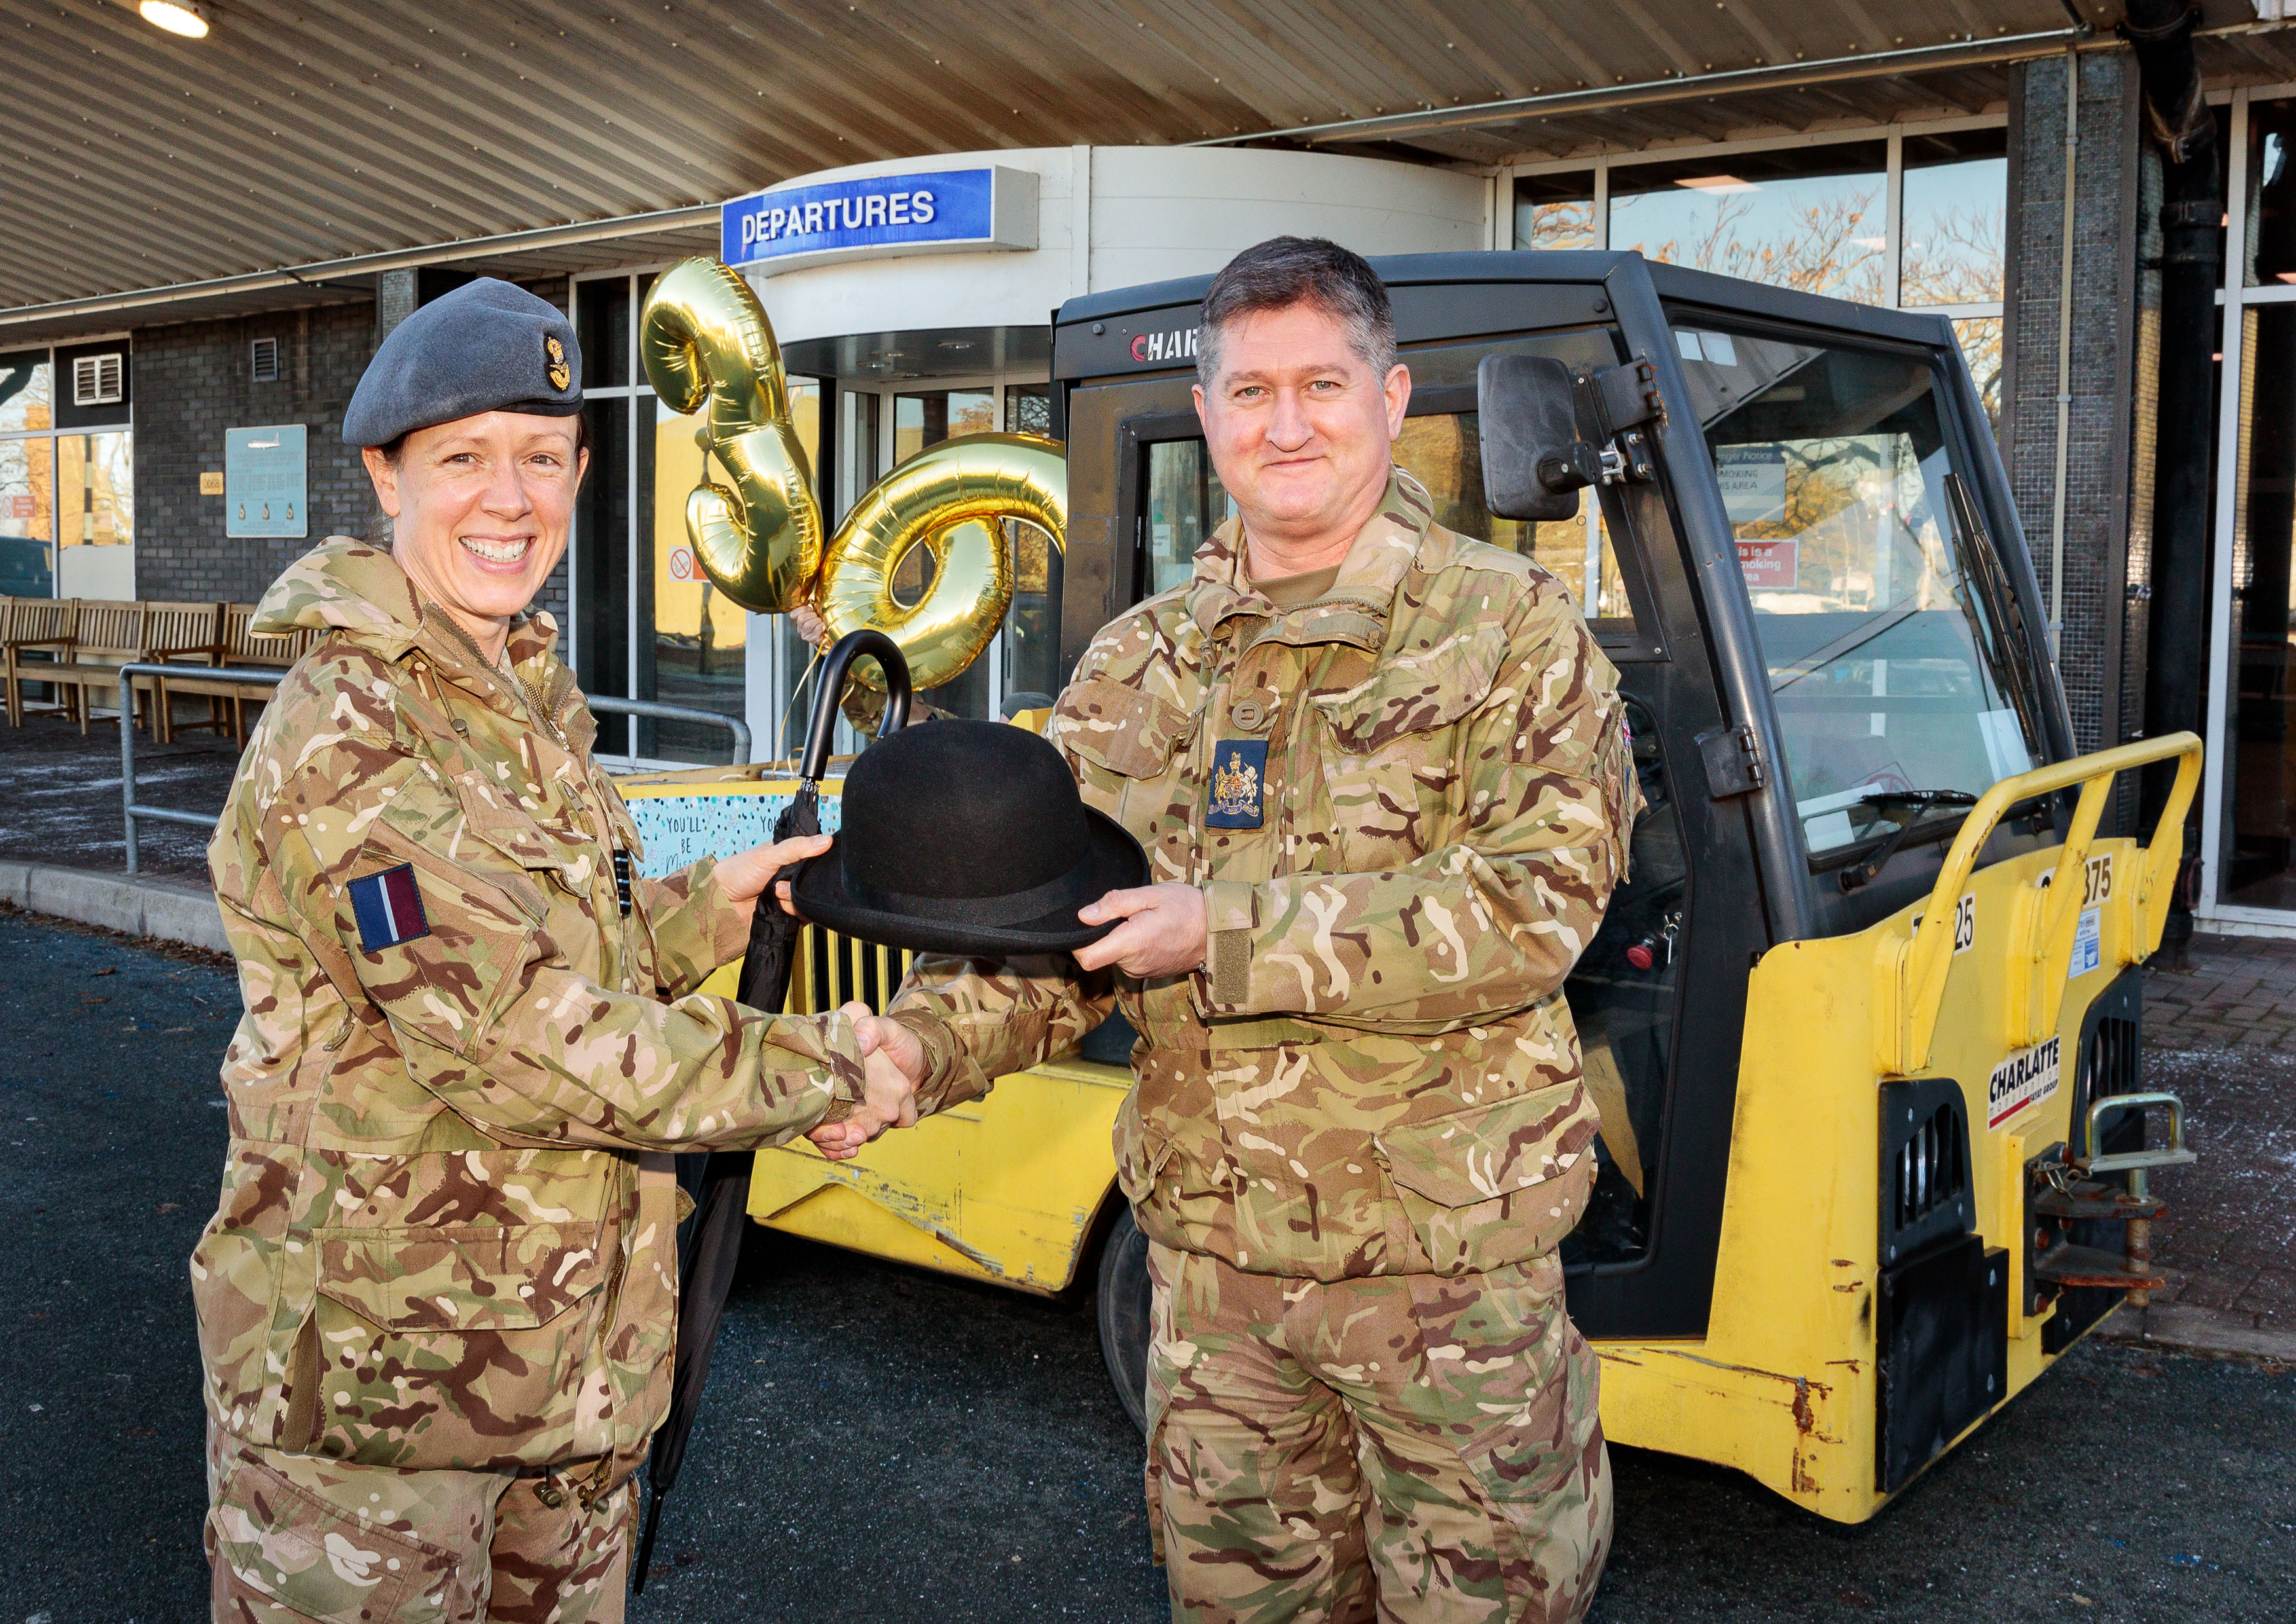 Warrant Officer Christopher Blythe was given a traditional RAF send off by personnel at Royal Air Force Brize Norton.